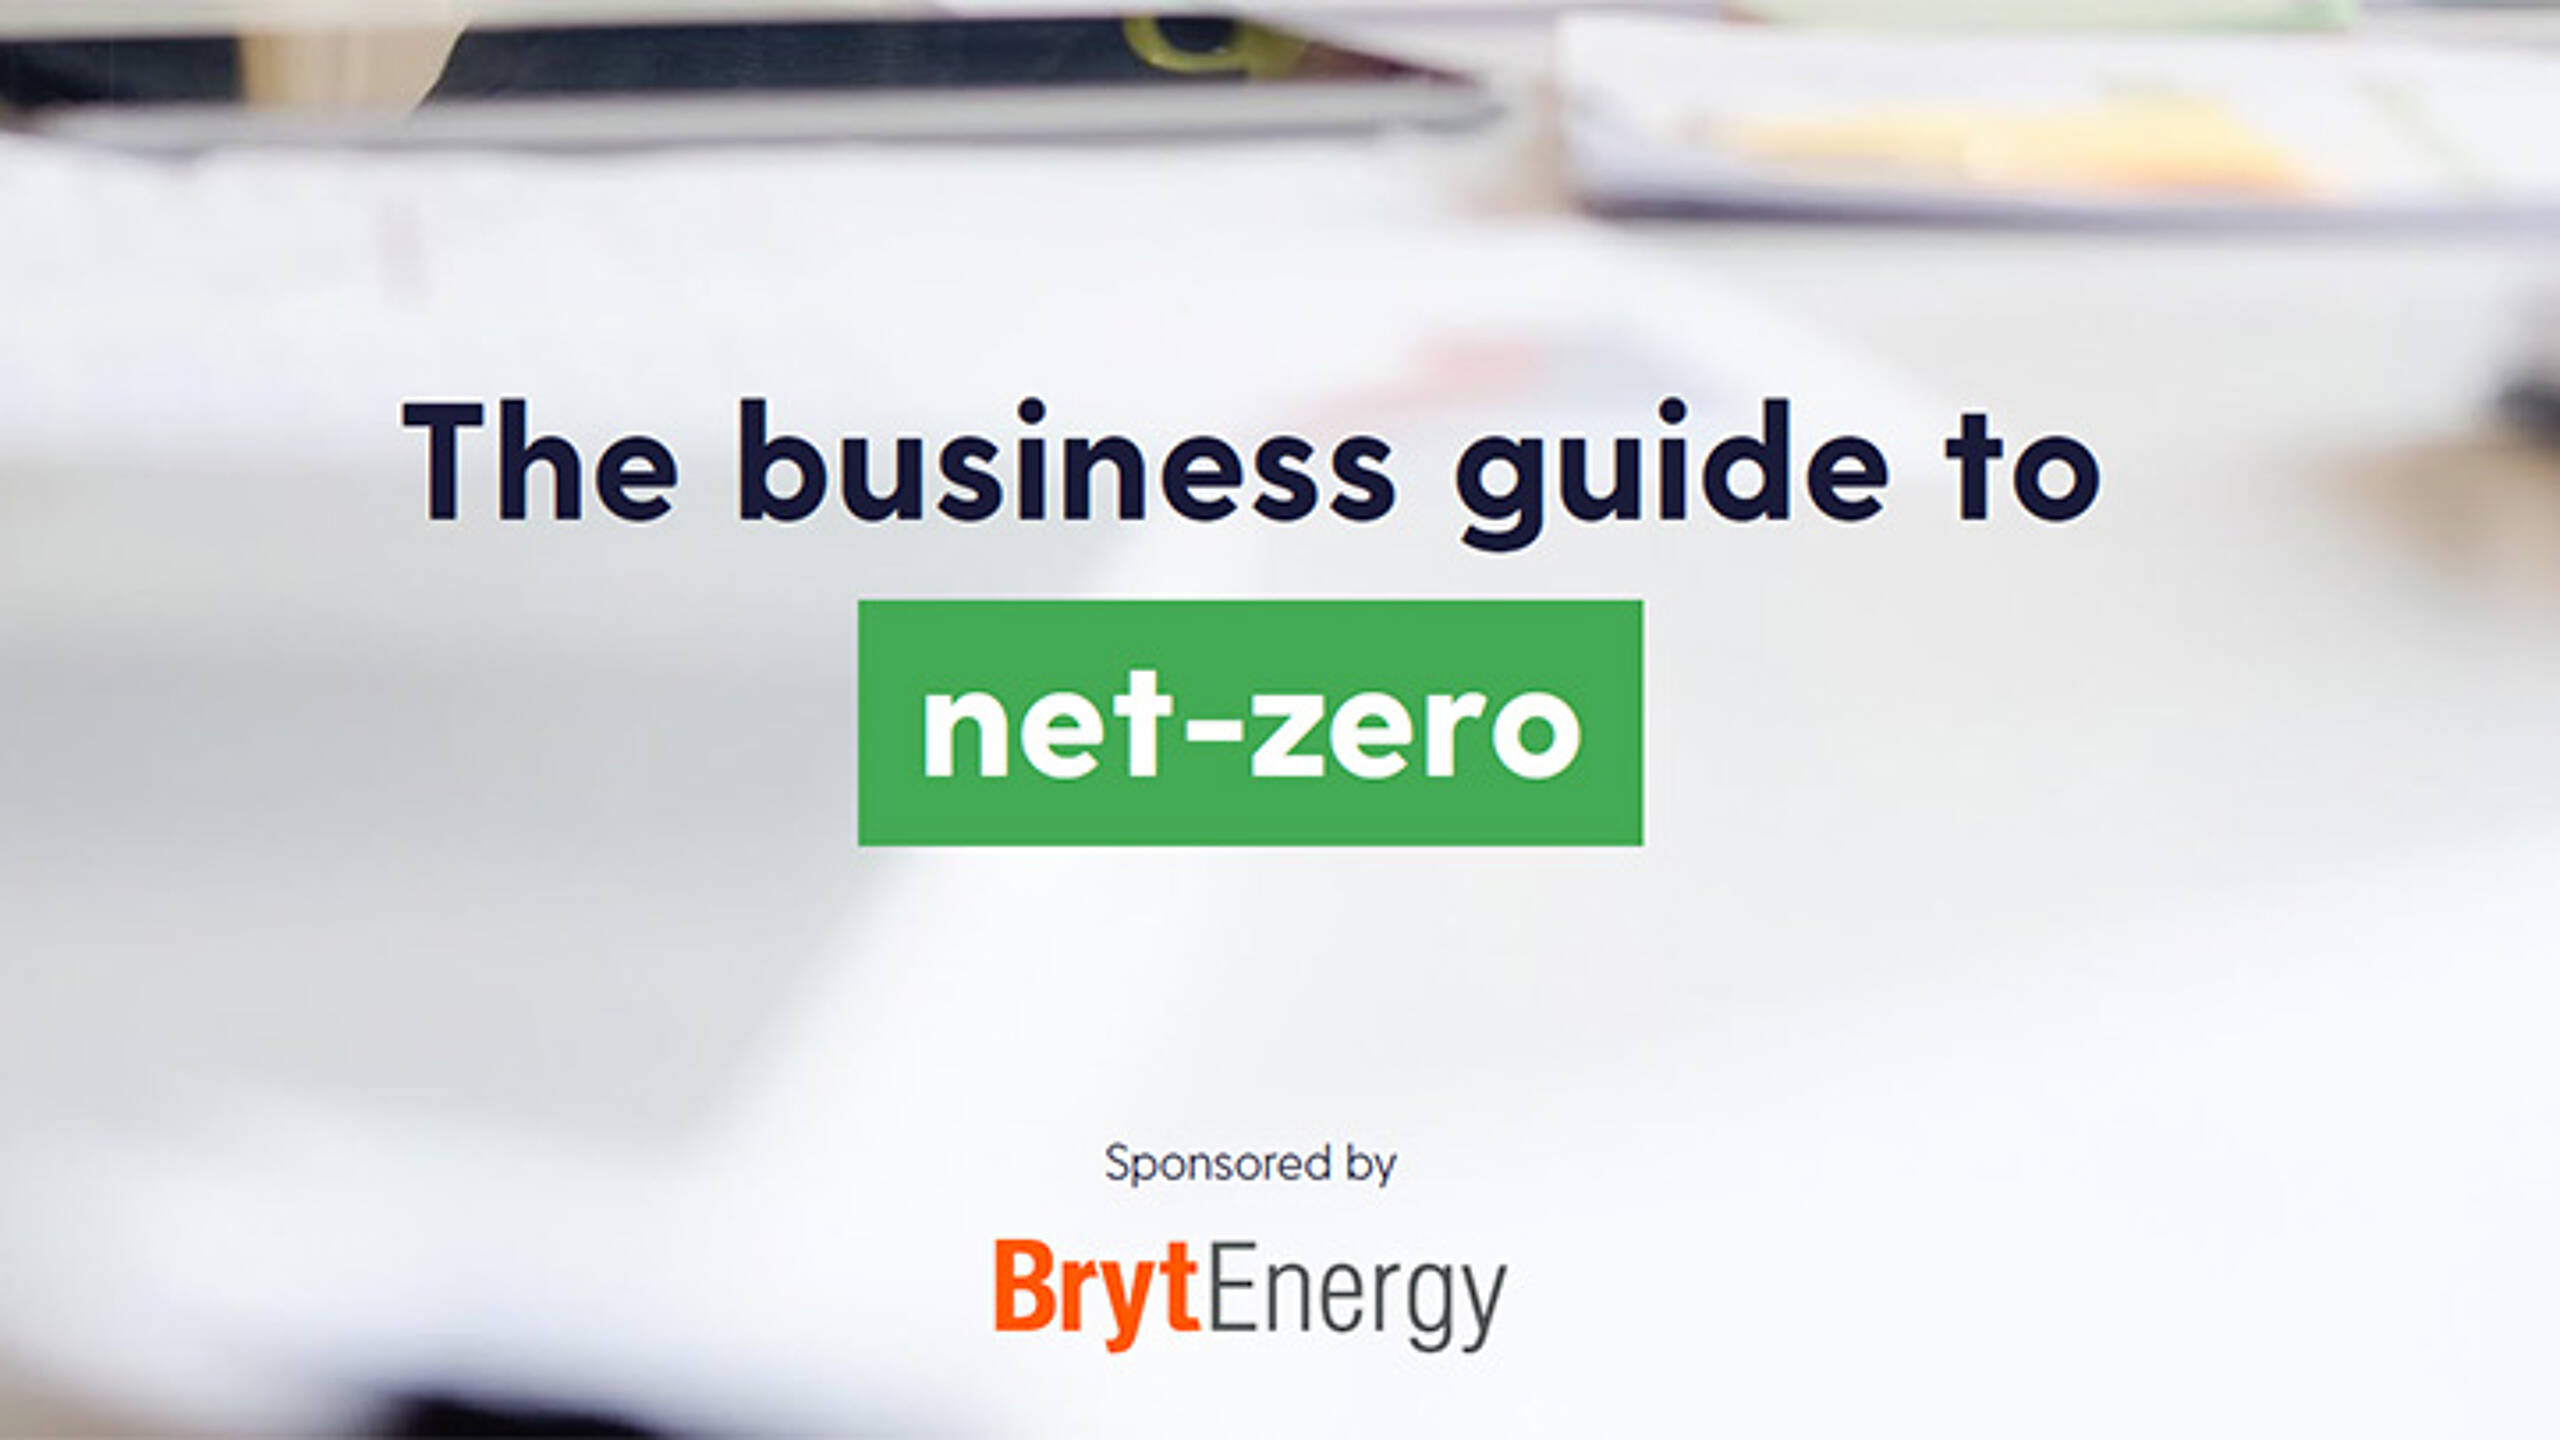 The business guide to net-zero